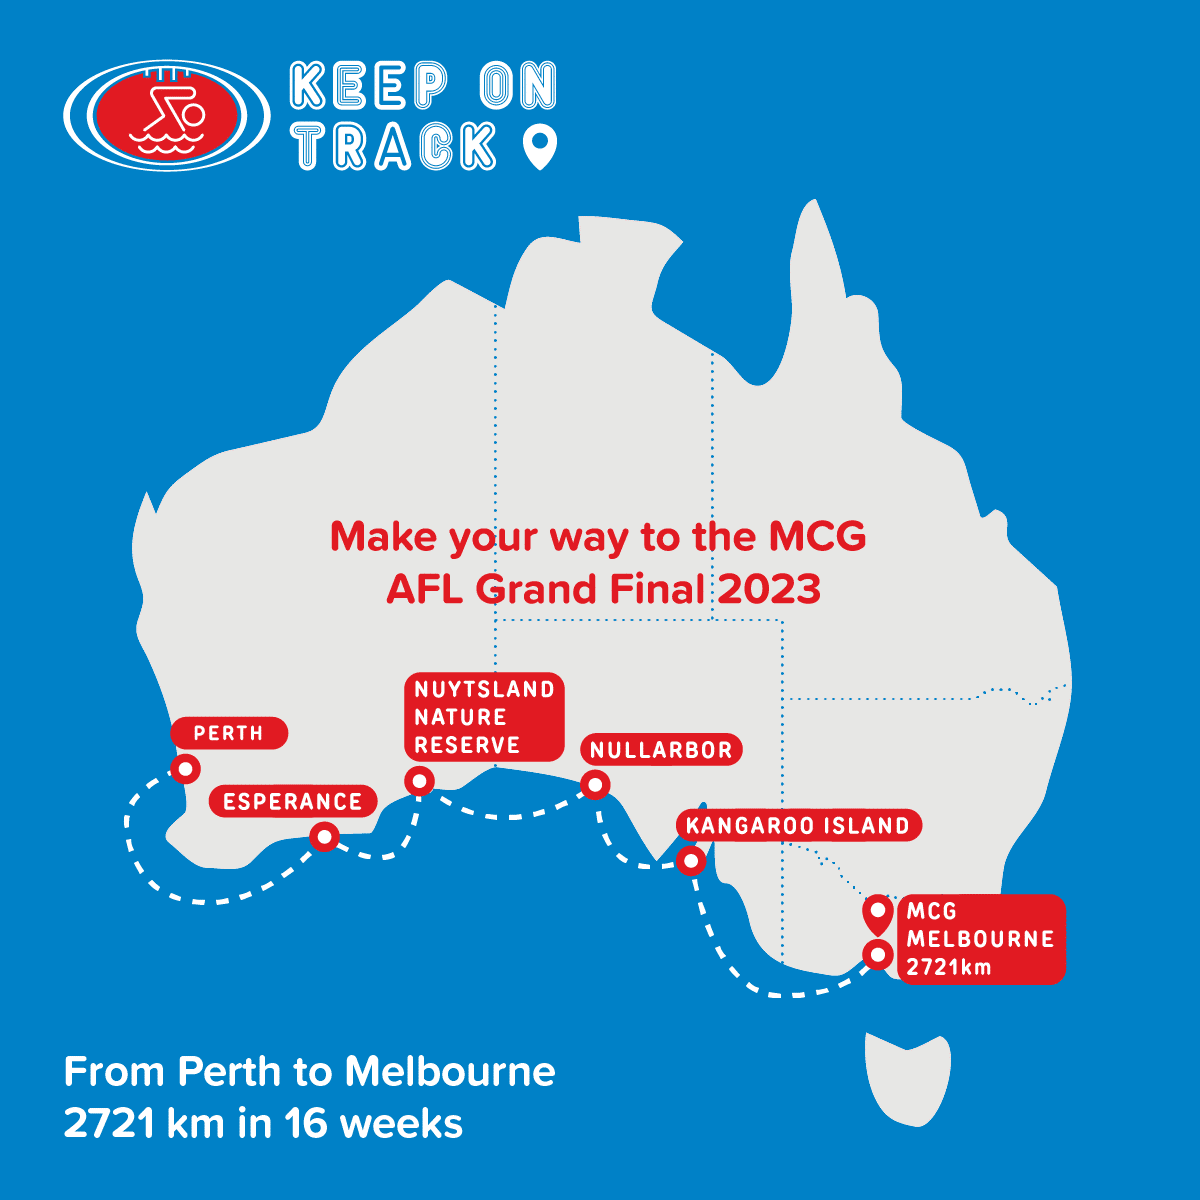 Keep on track - from perth to melbourne - leaderboard